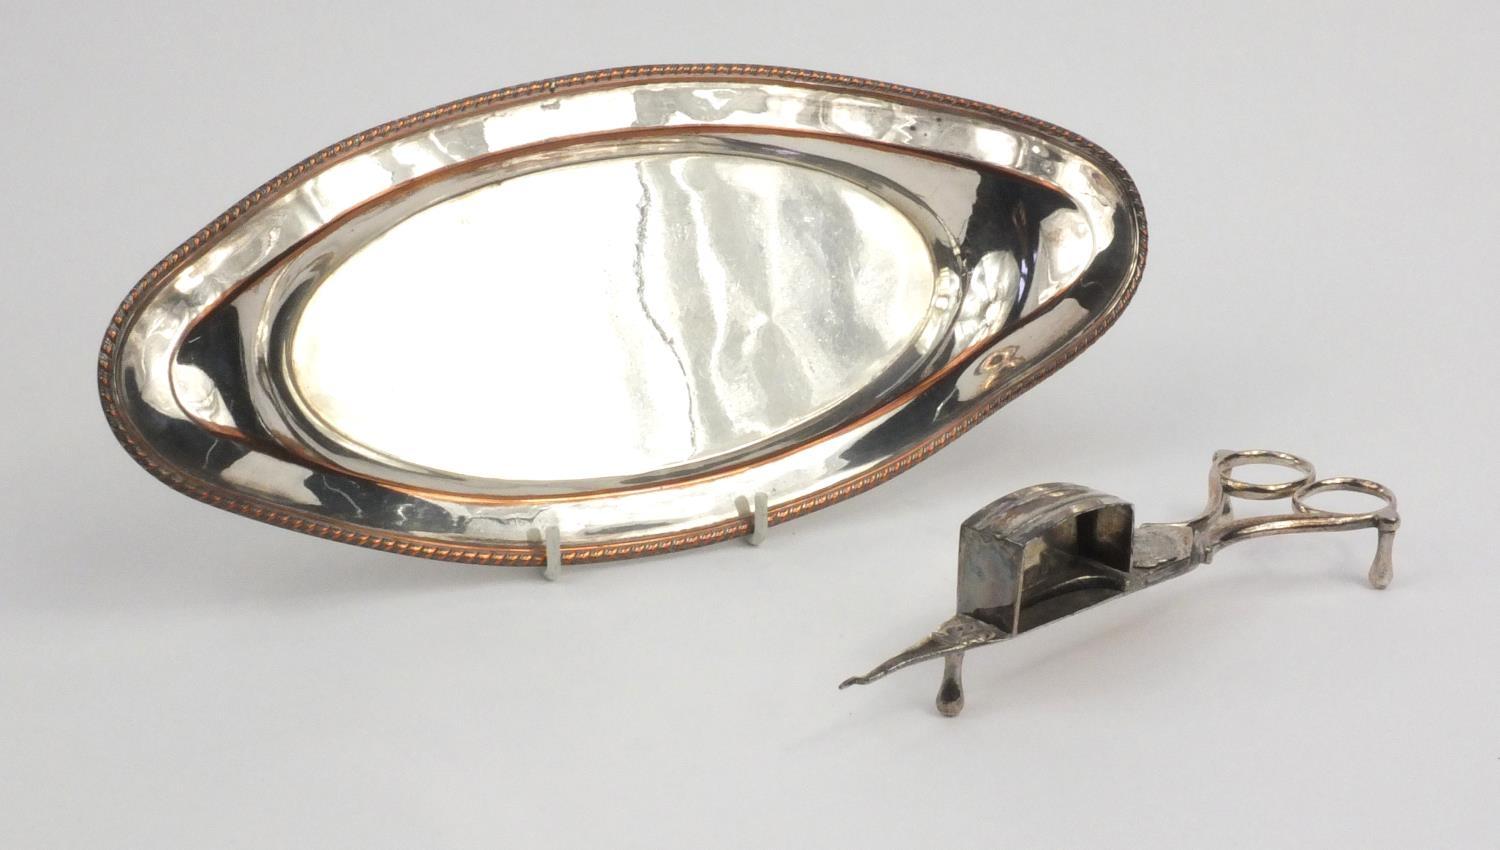 Victorian Sheffield plated candle snuffer on tray, 28cm diameter - Image 2 of 6